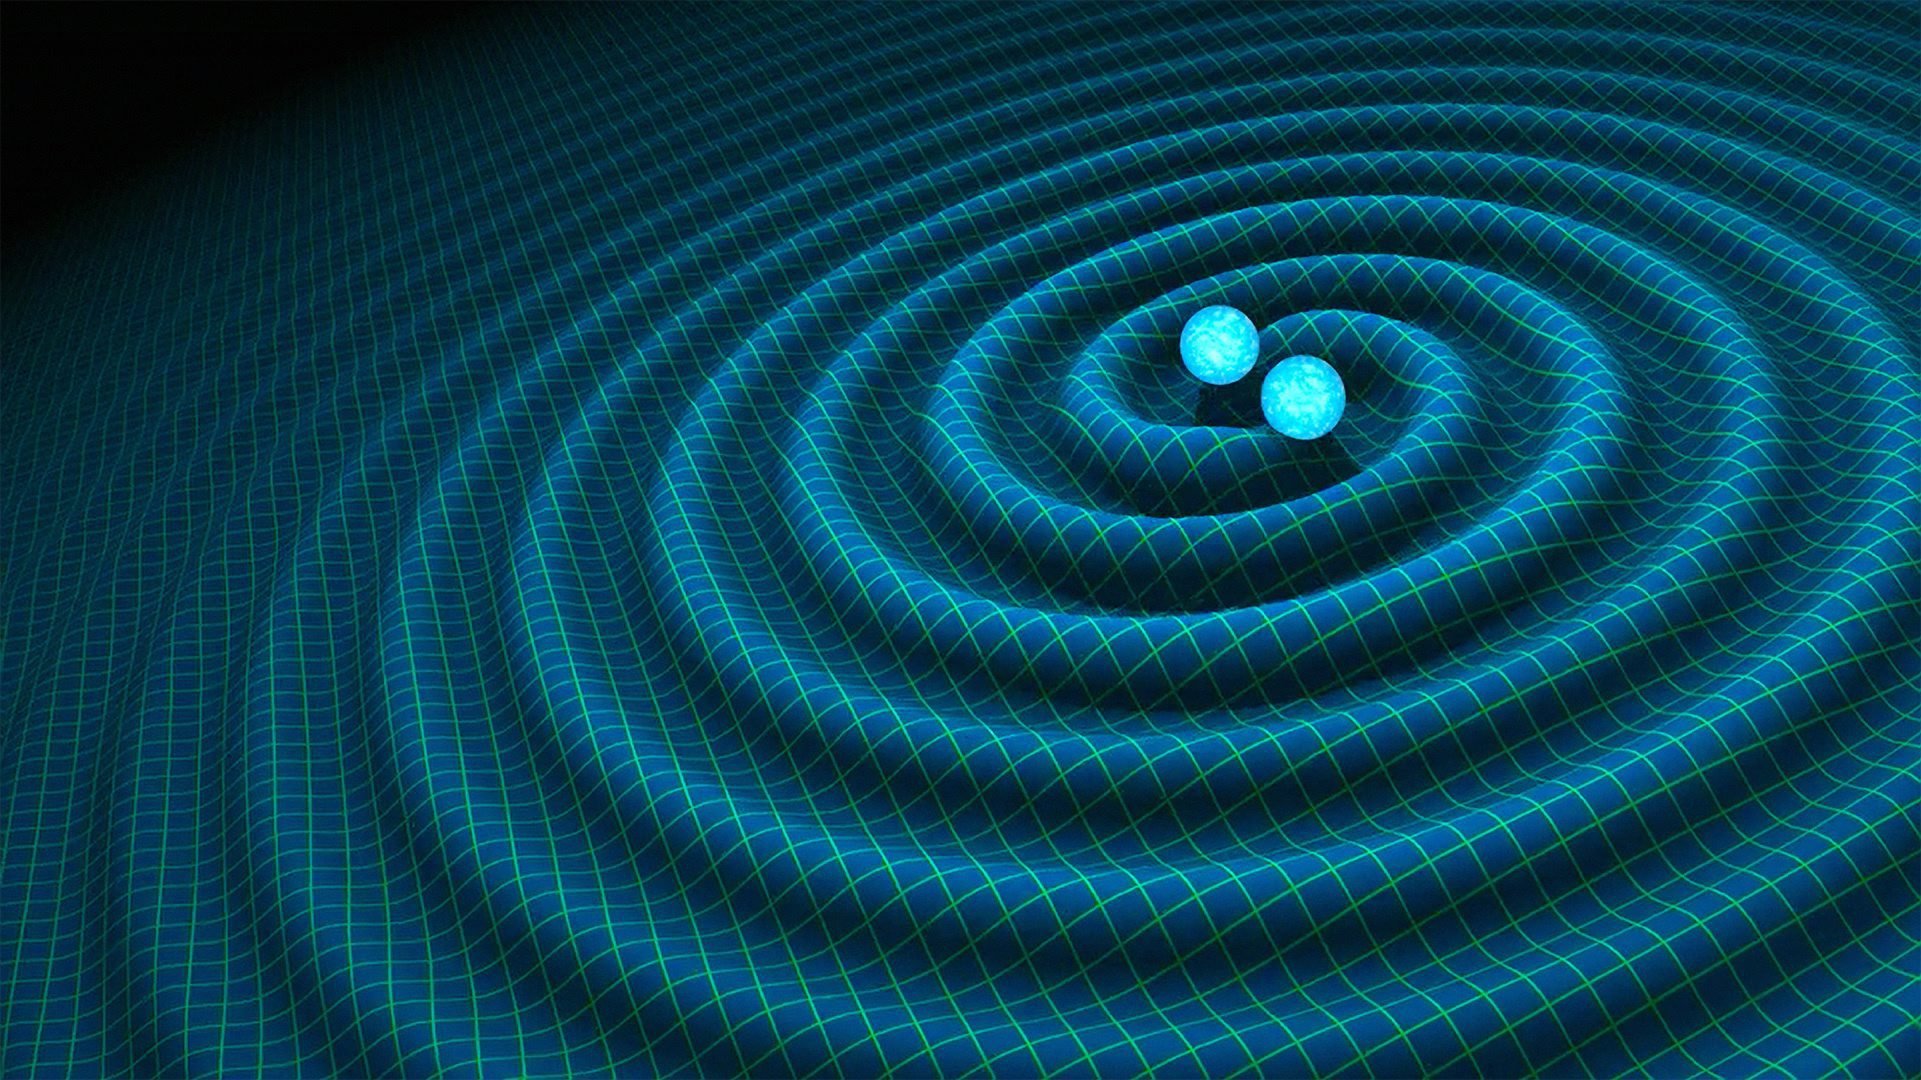 An artist's impression of gravitational waves generated by binary neutron stars. US researchers said on Feb. 11 2016 they have detected gravitational waves, which physicist Albert Einstein first described 100 years ago as 'ripples in the fabric of space-time.'